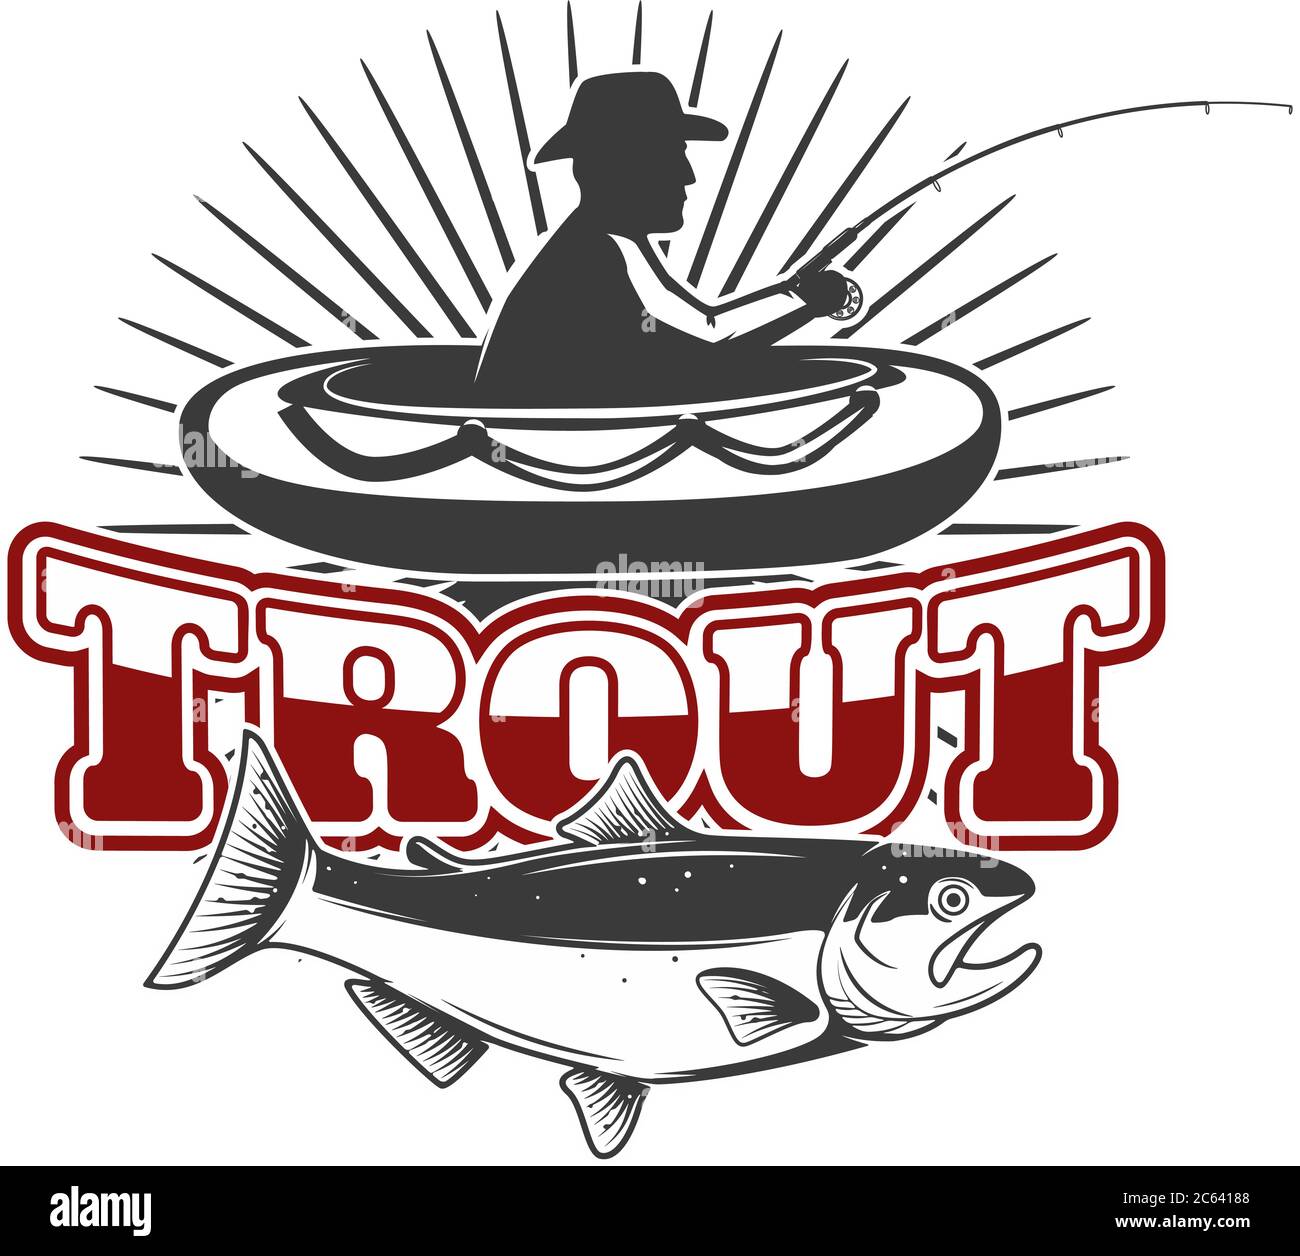 Trout fishing.Emblem template with trout and fisherman on rubber boat. Design element for logo, label, design. Vector illustration Stock Vector